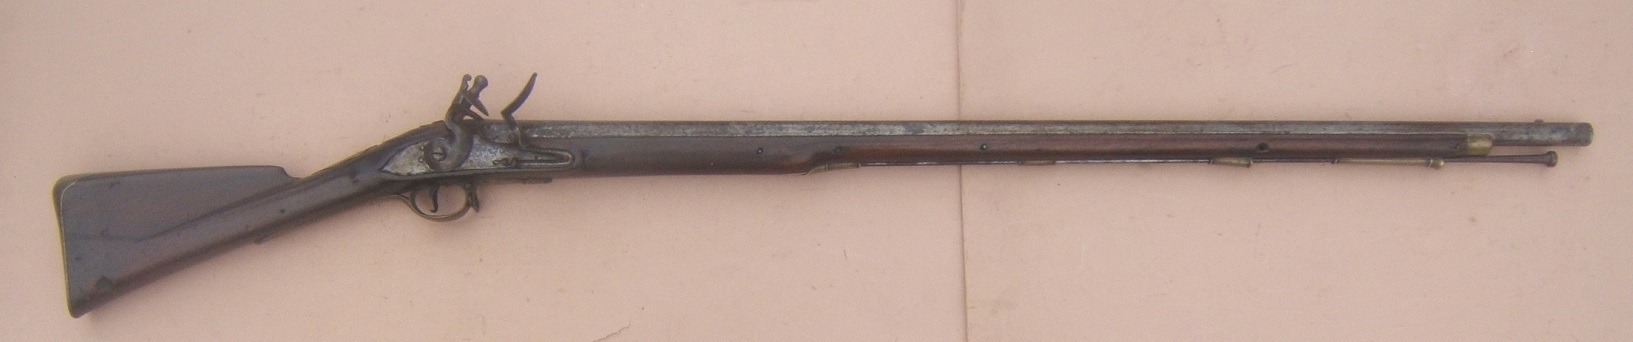 A FINE AMERICAN-USED REVOLUTIONARY WAR PATTERN 1777 SECOND MODEL/SHORTLAND BROWN BESS MUSKET, ca. 1778 view 1